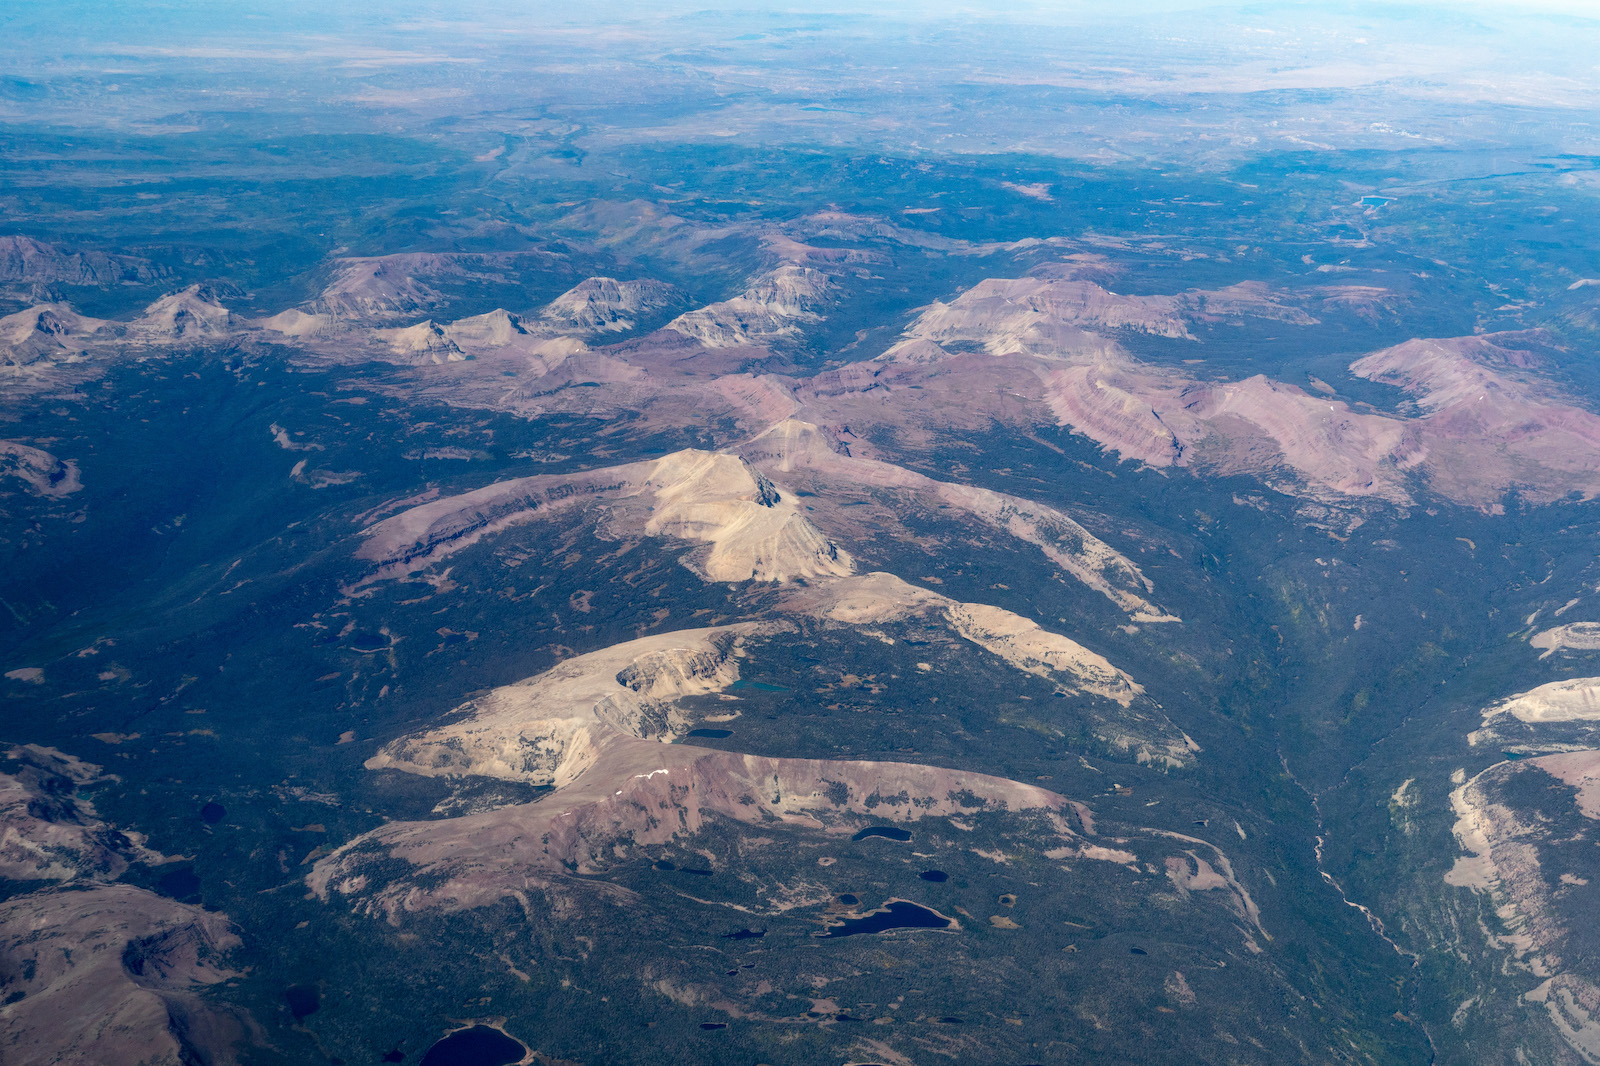 An aerial view of the Uinta Mountains